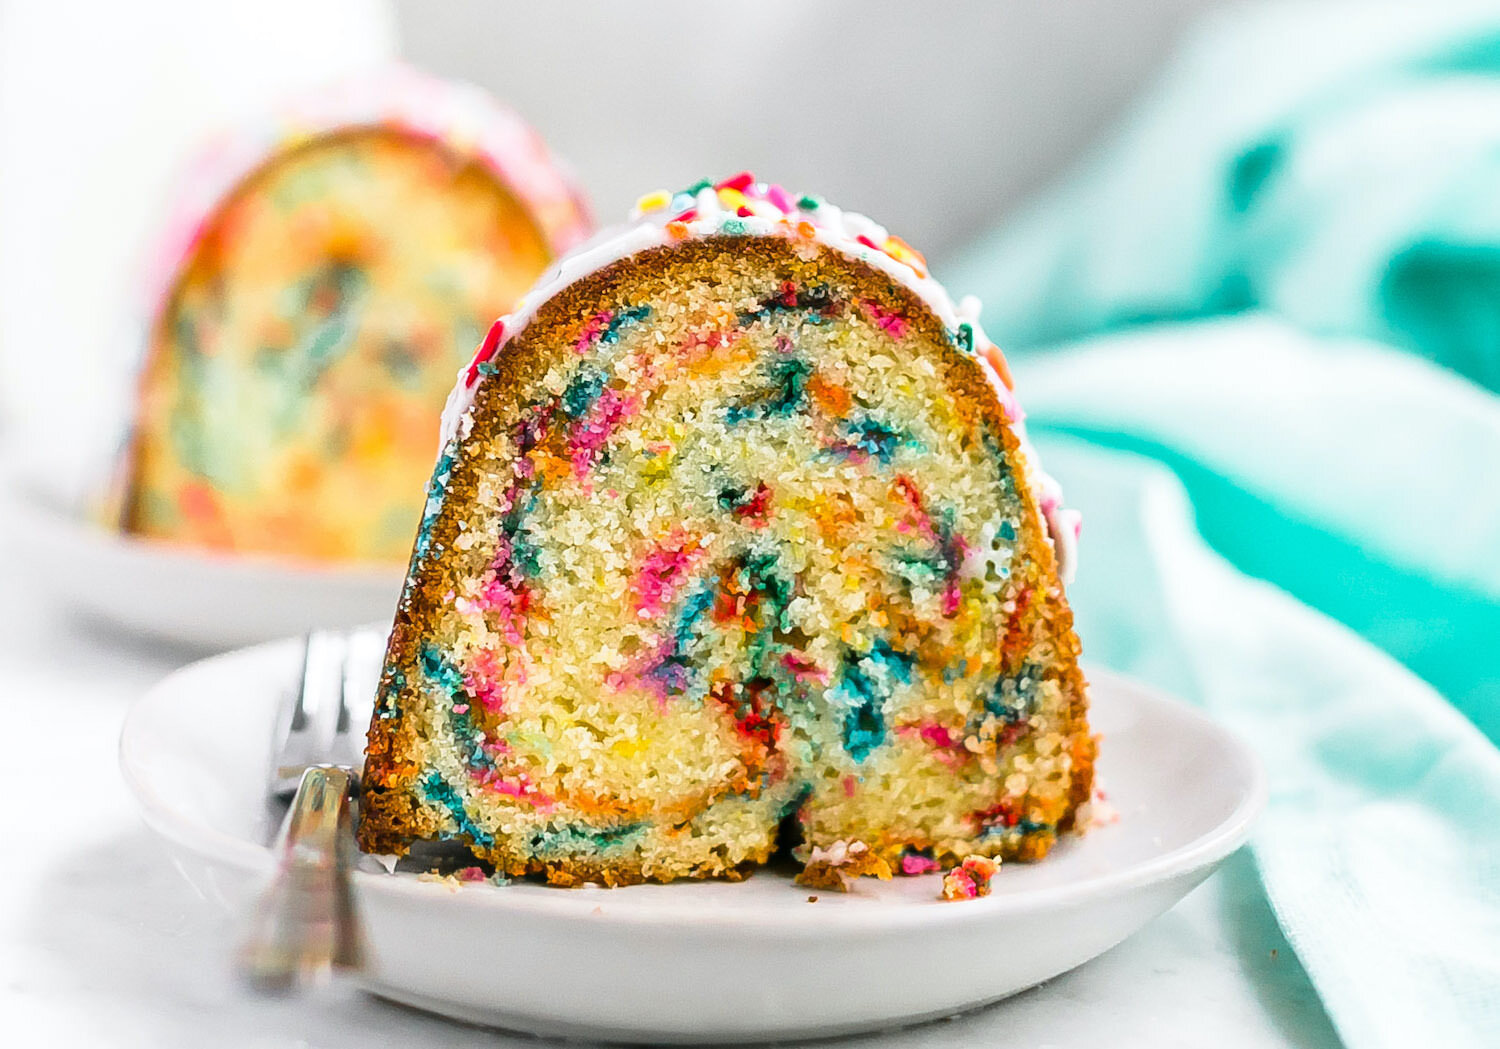 Confetti Bundt Cake - She's Almost Always Hungry